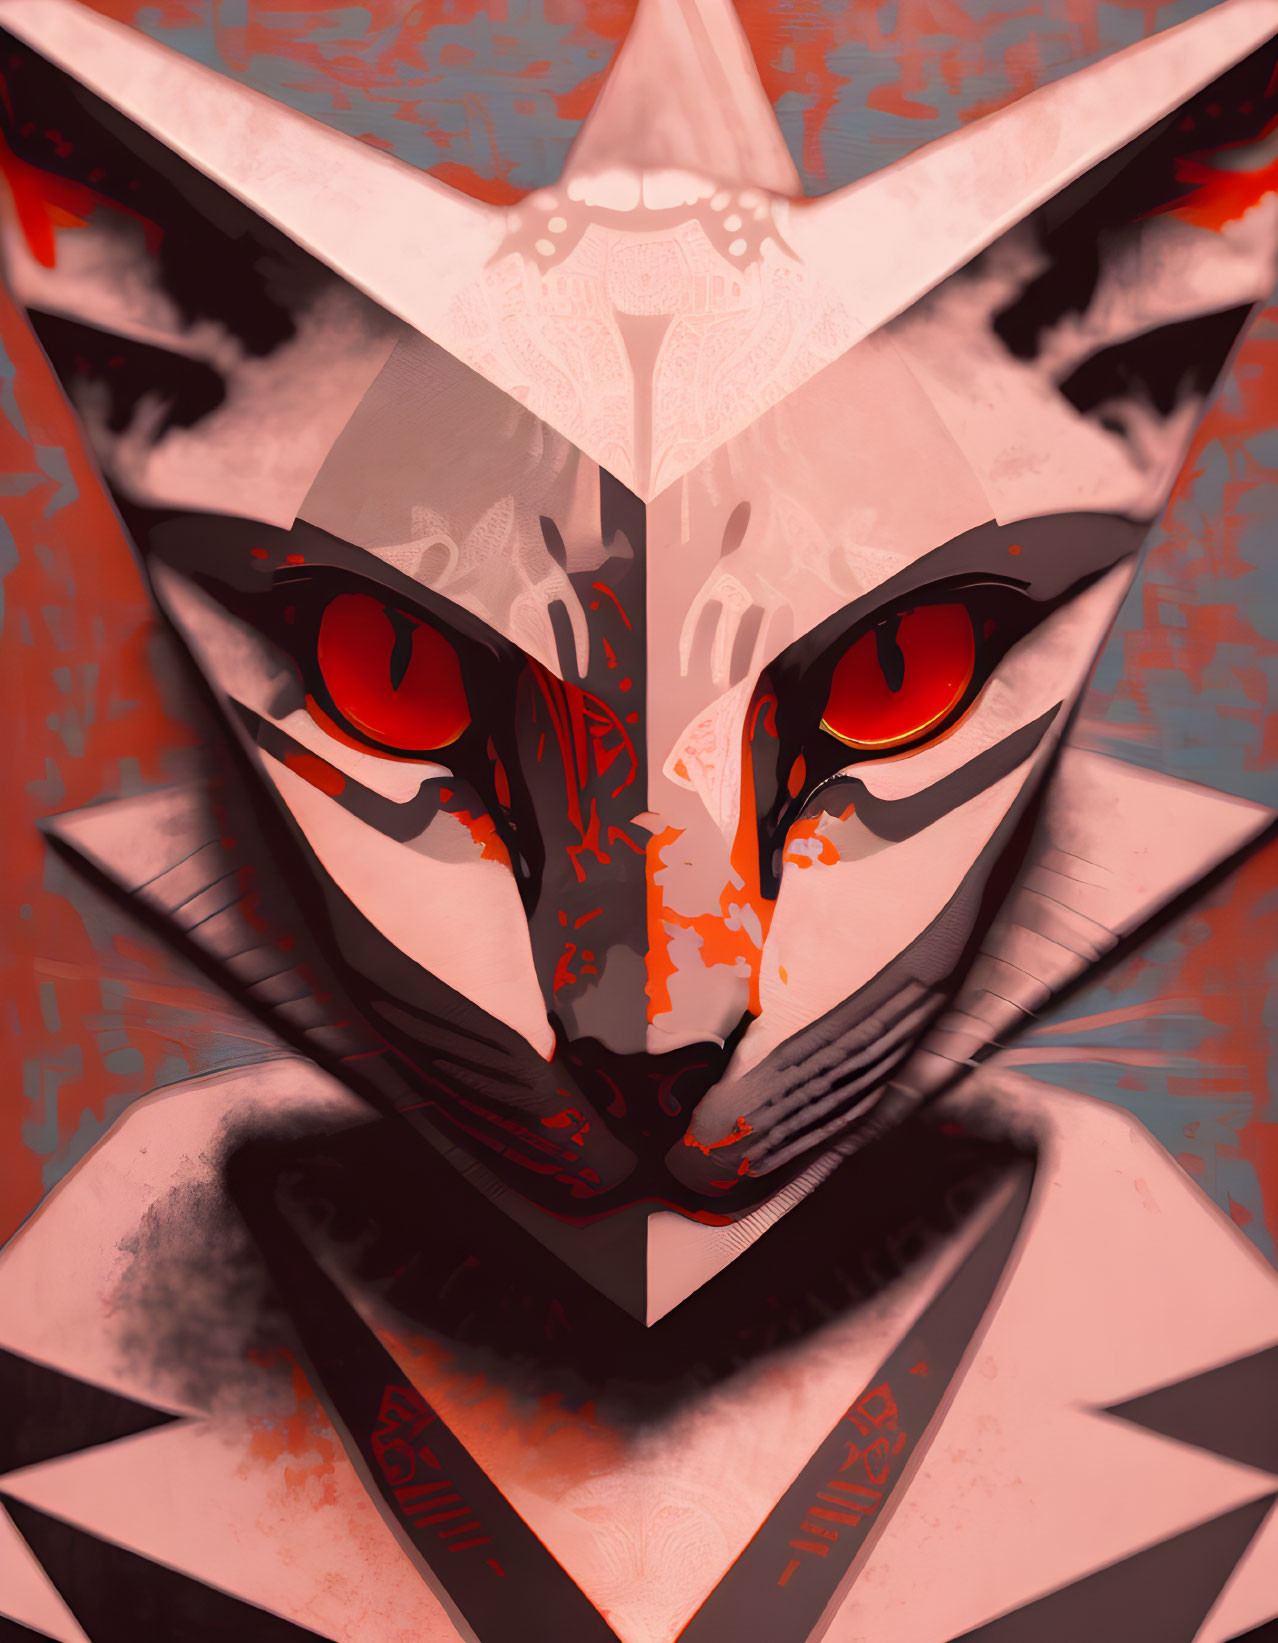 Stylized cat with geometric patterns and red eyes on orange textured background